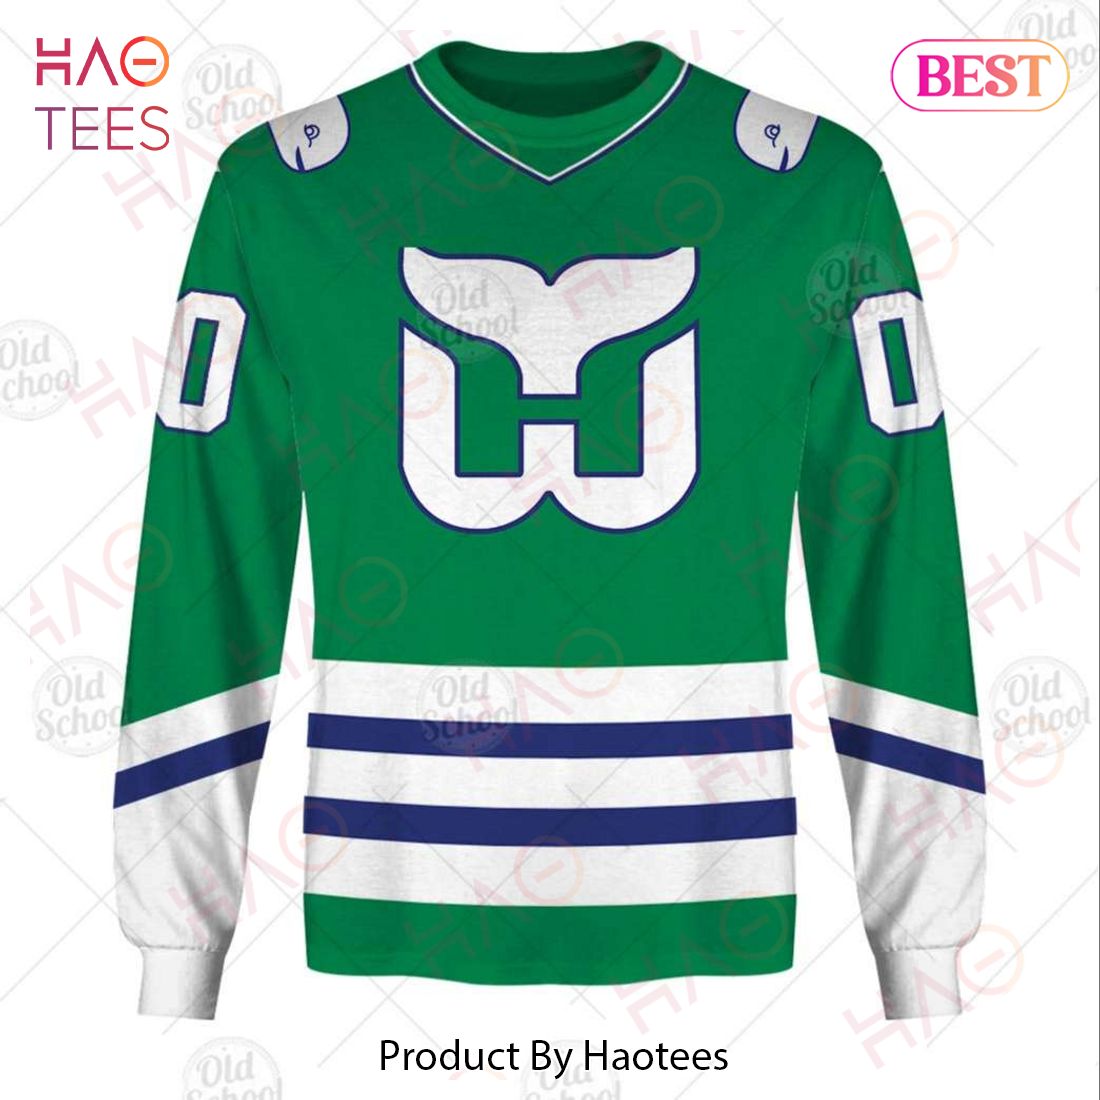 On sale now: Hartford Whalers merchandise available during